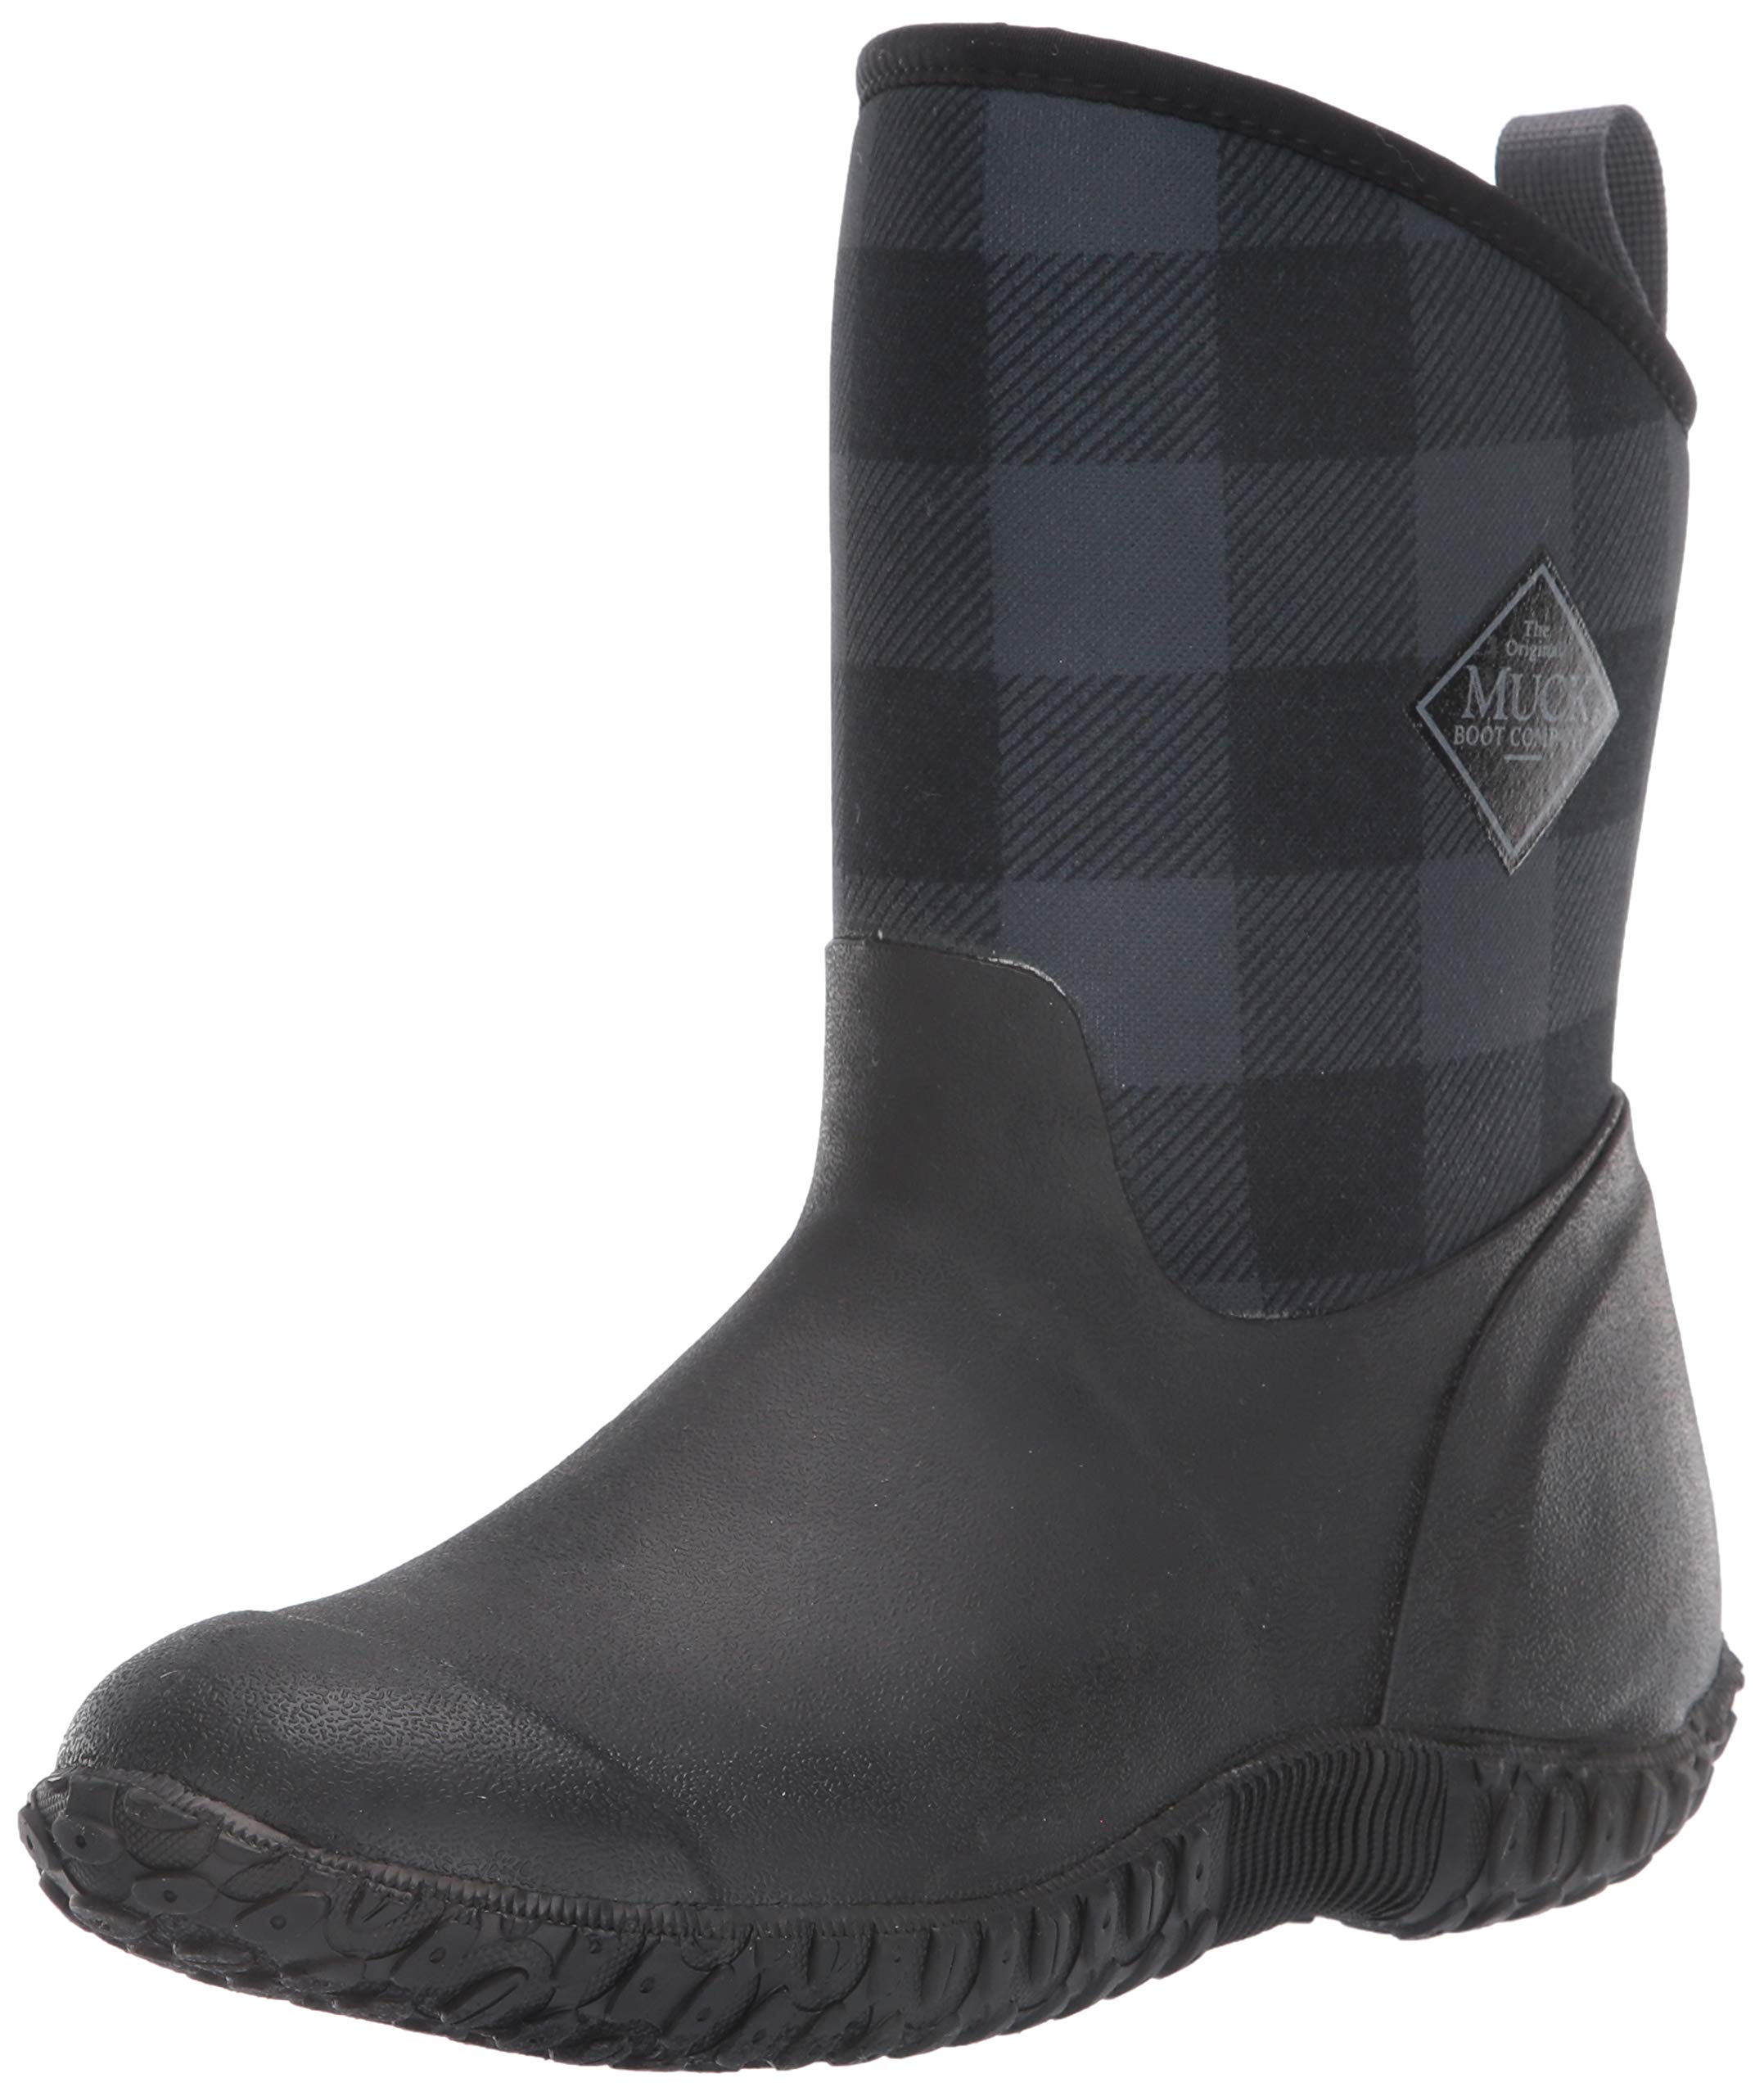 Muck Boot Women's Muckster Ii Mid Ankle Boot